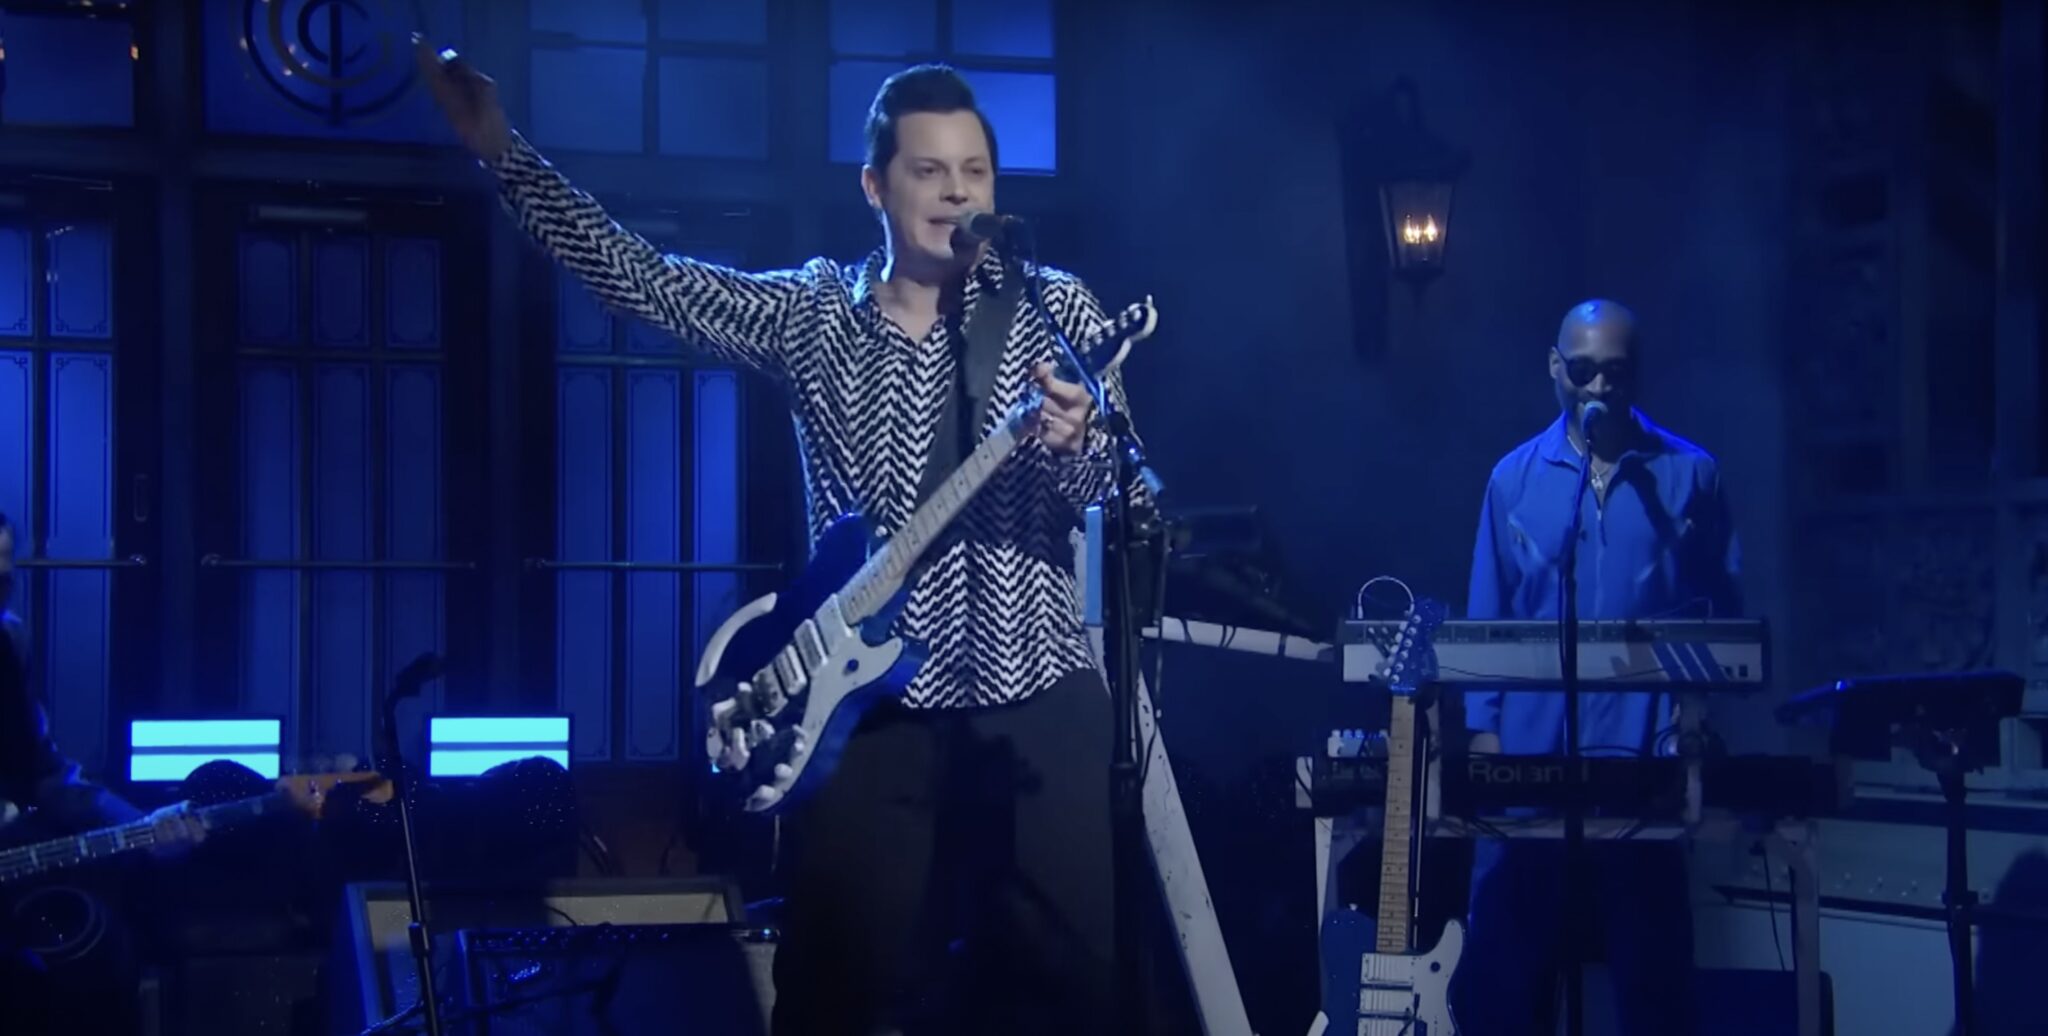 Jack White Brings the Thunder to Mark His Fifth 'SNL' Appearance